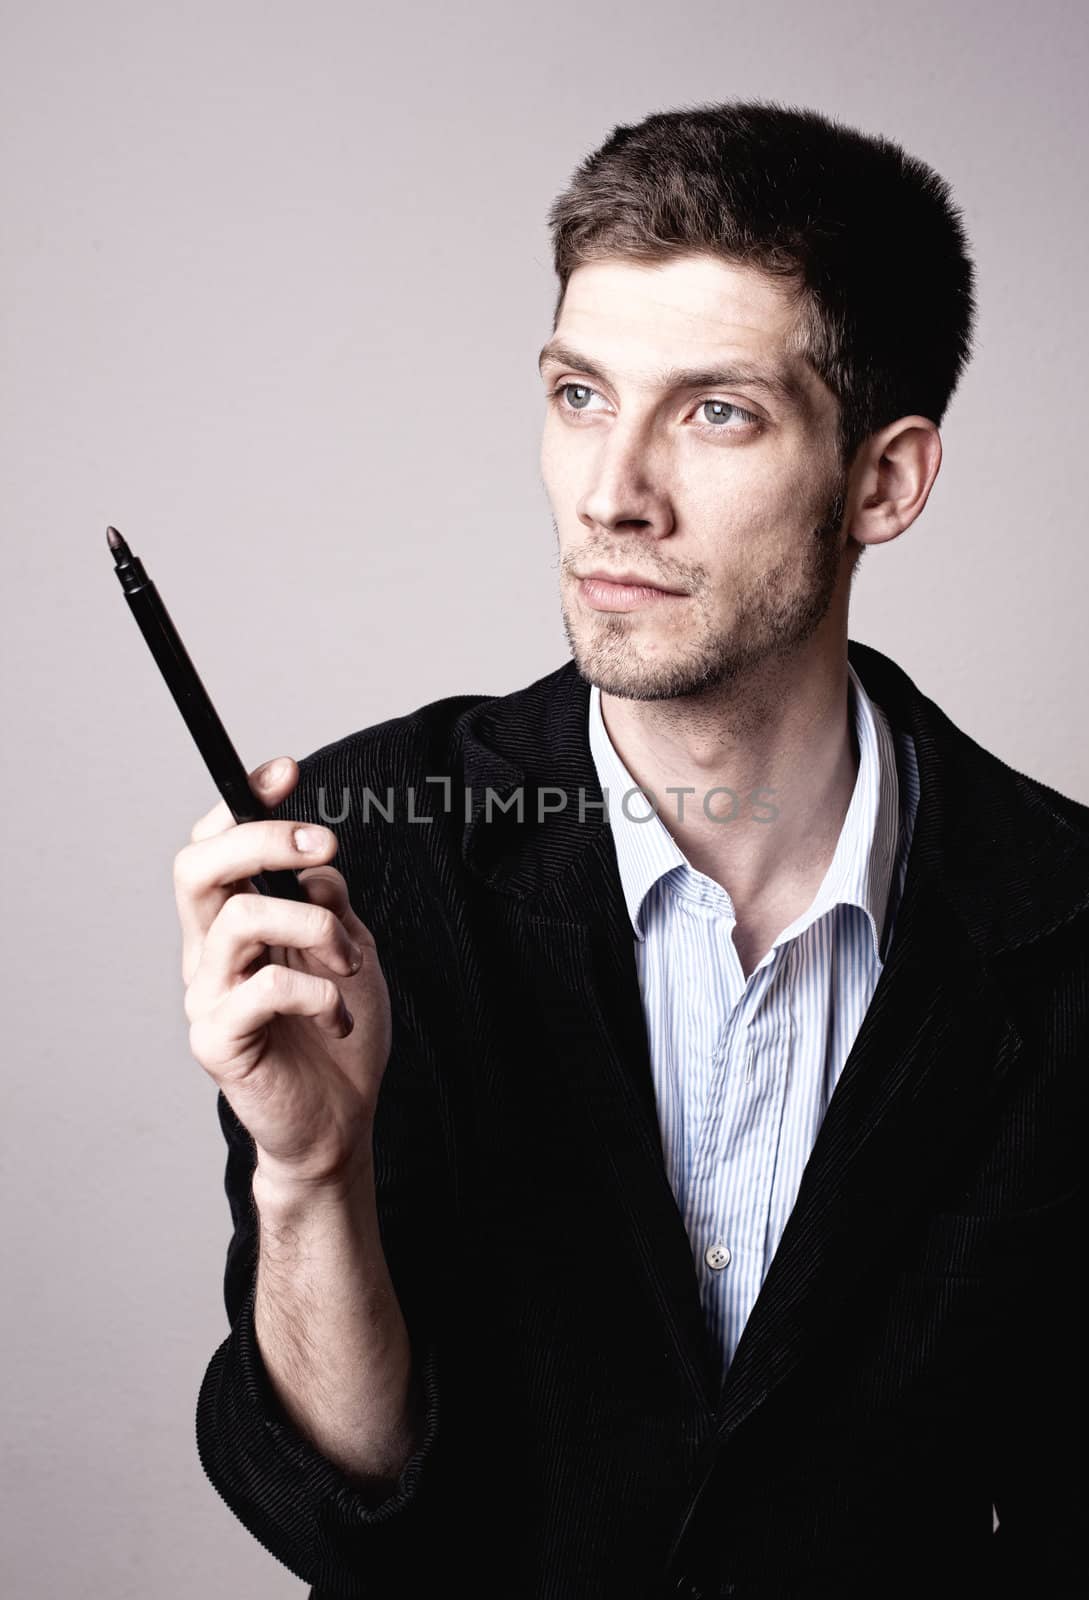 Man thinking about a solution with a pencil